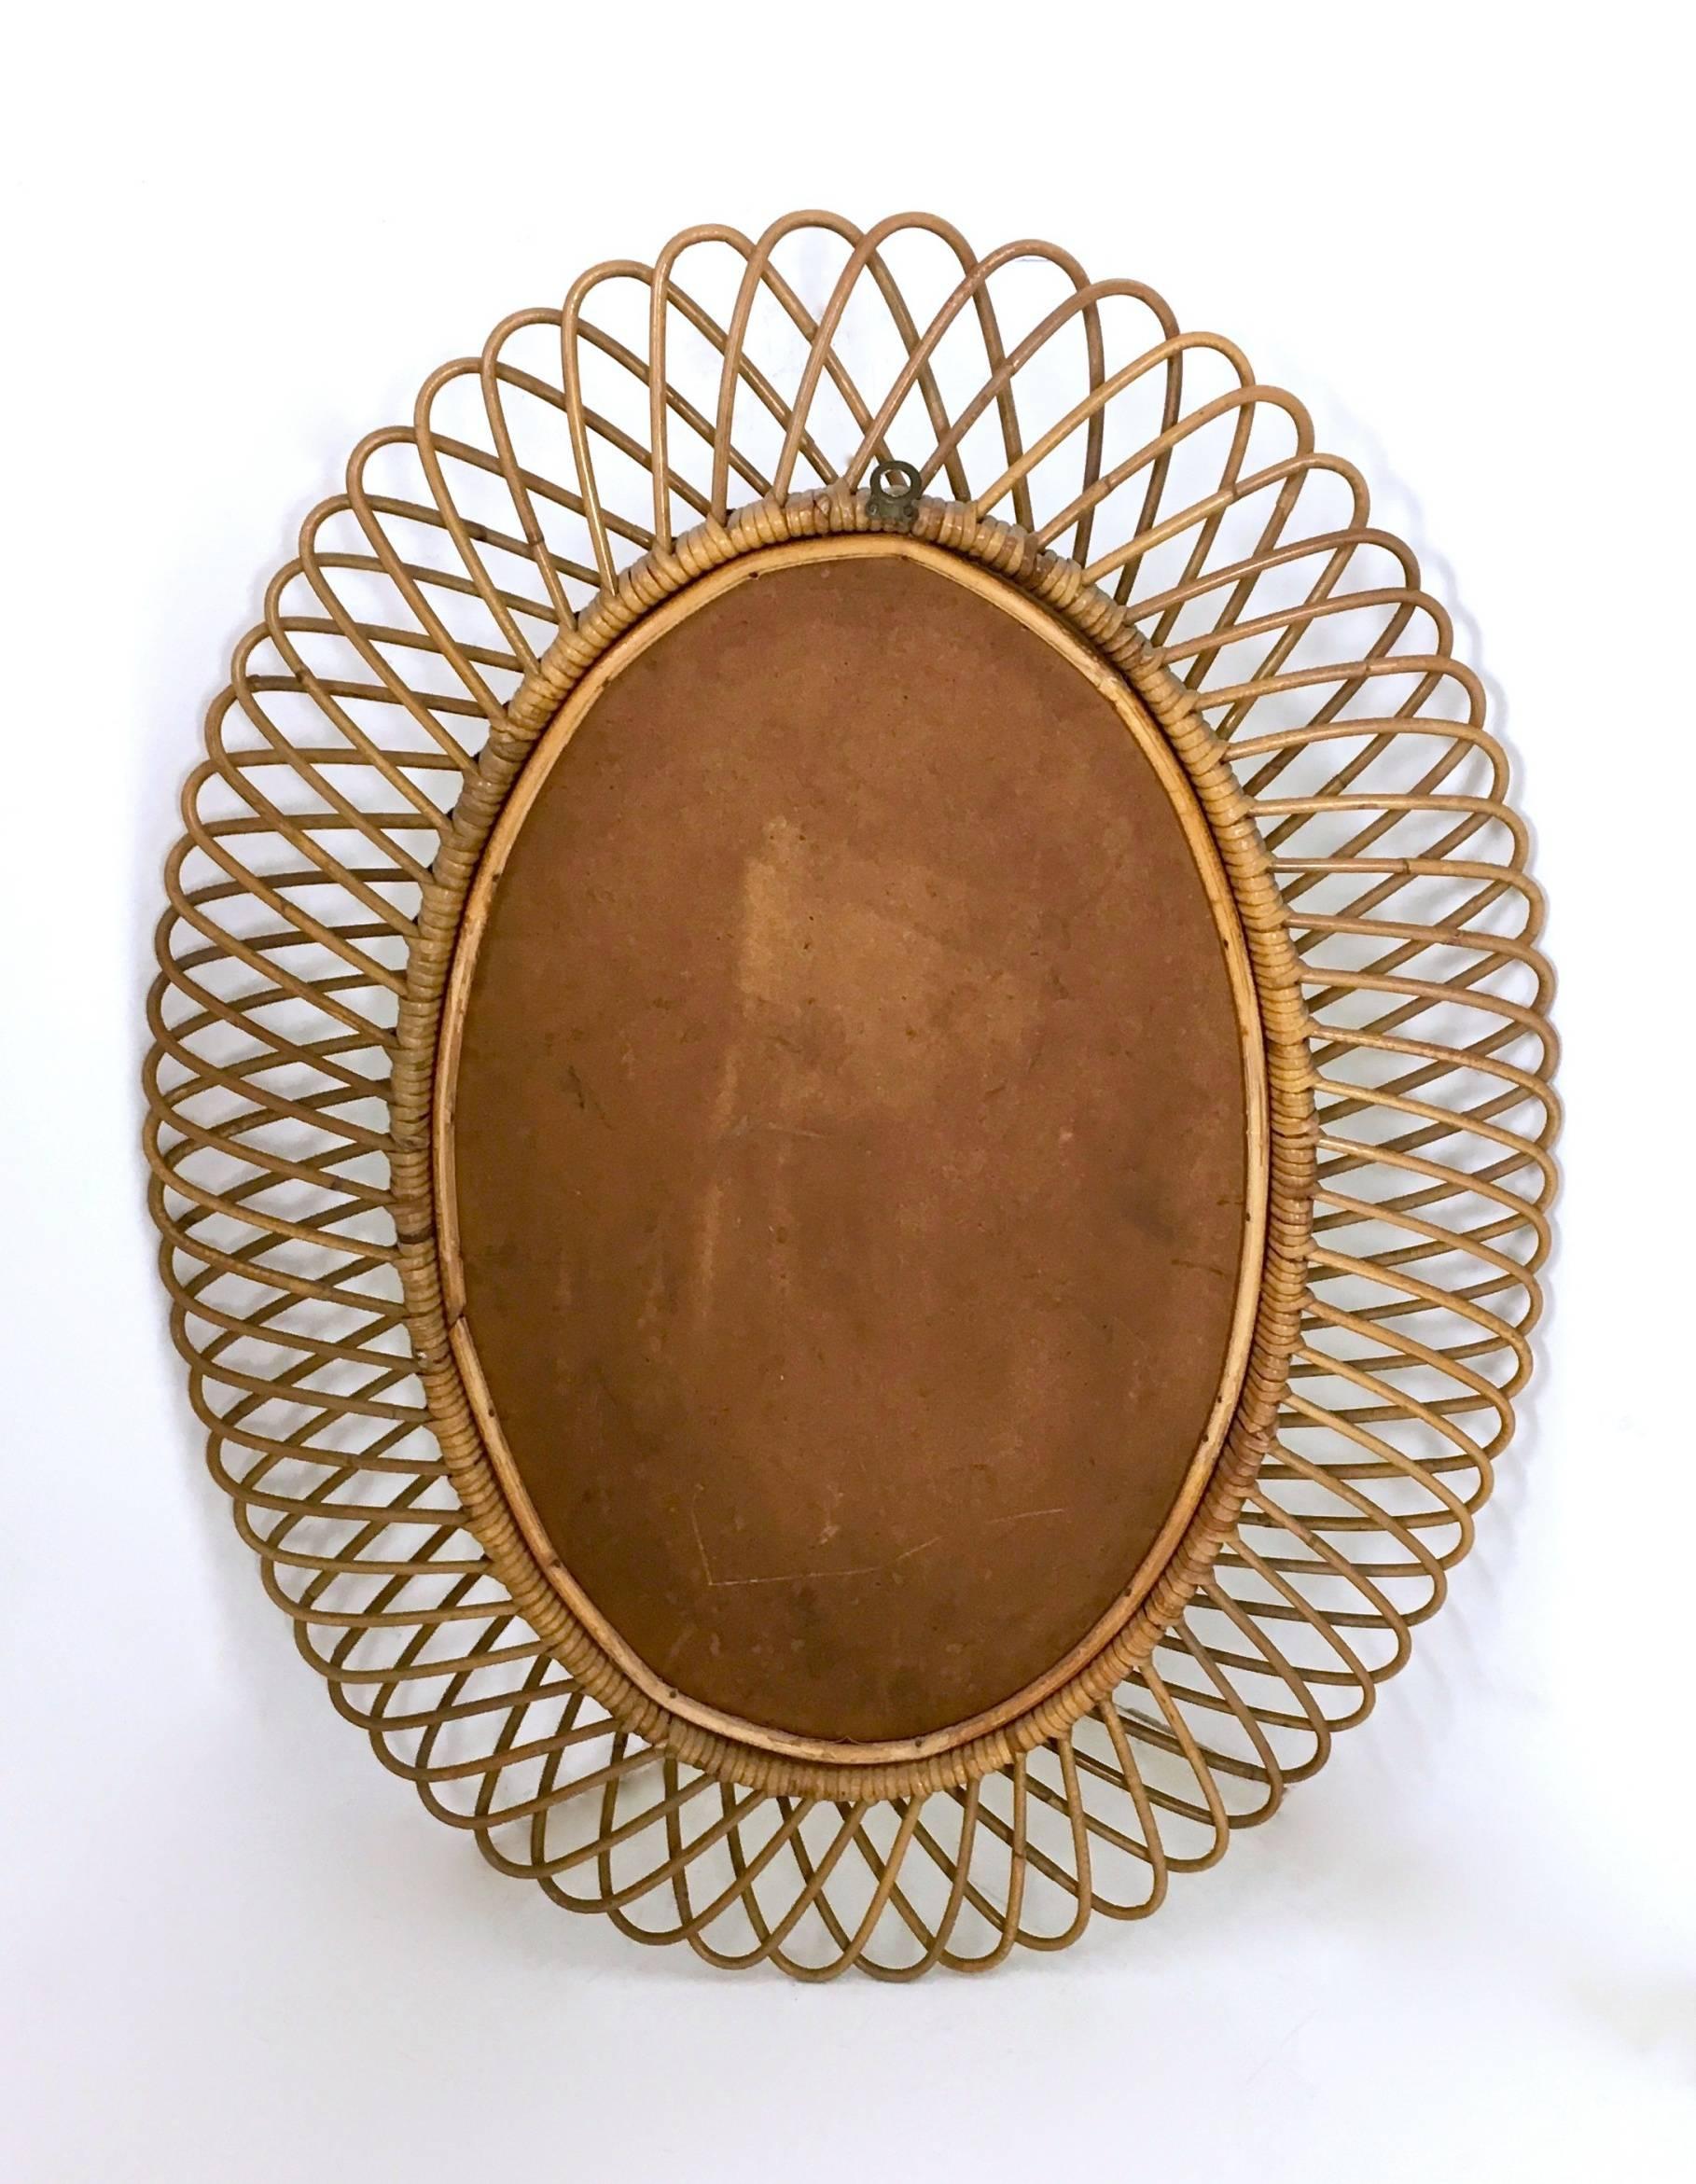 Made in mirror and wicker. 
In perfect condition.